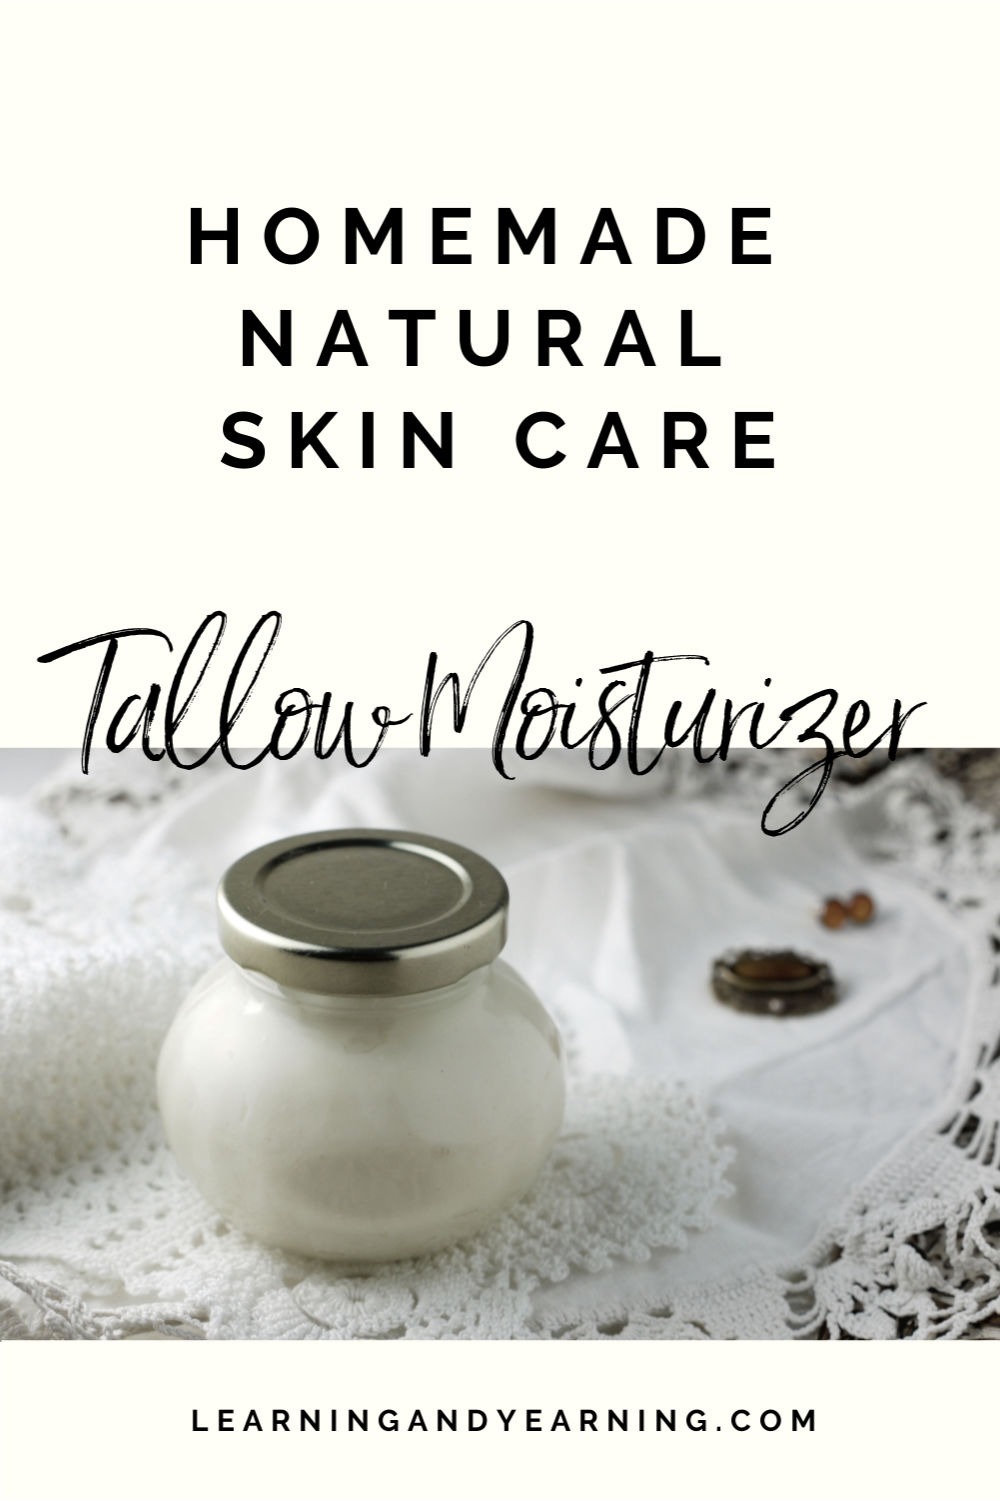 Tallow Moisturizer for Natural Skin Care